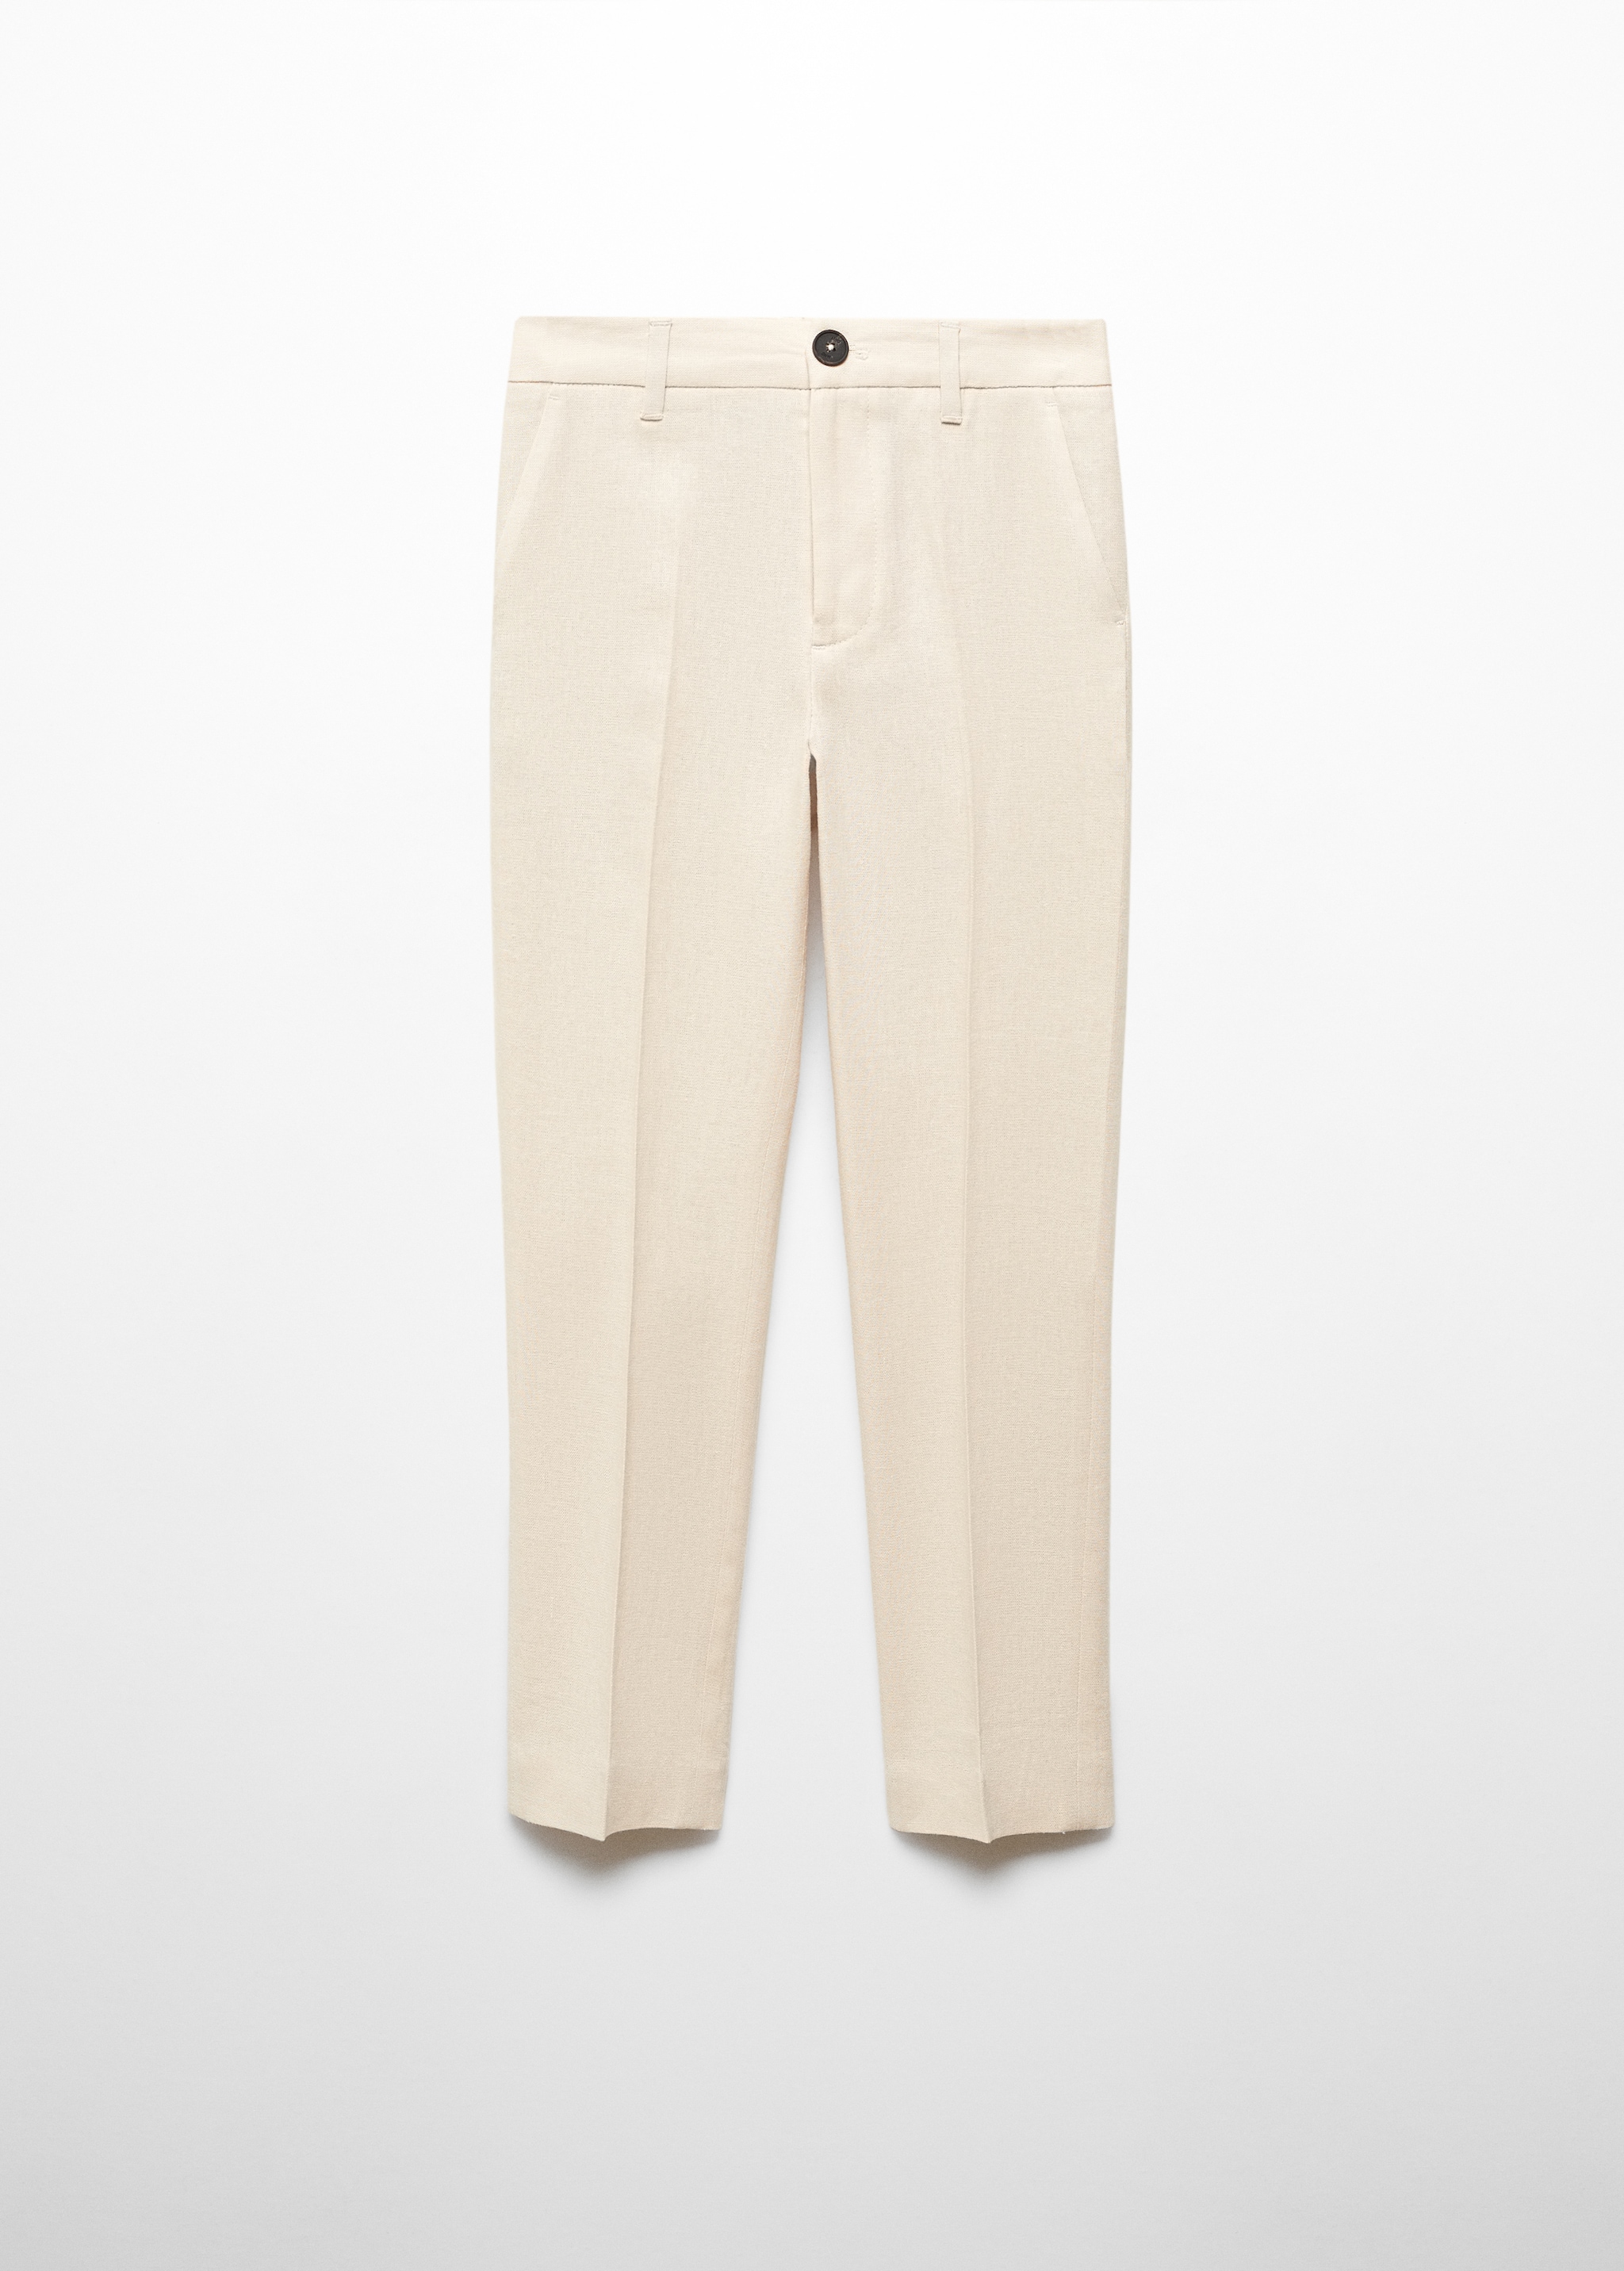  Linen suit trousers - Article without model